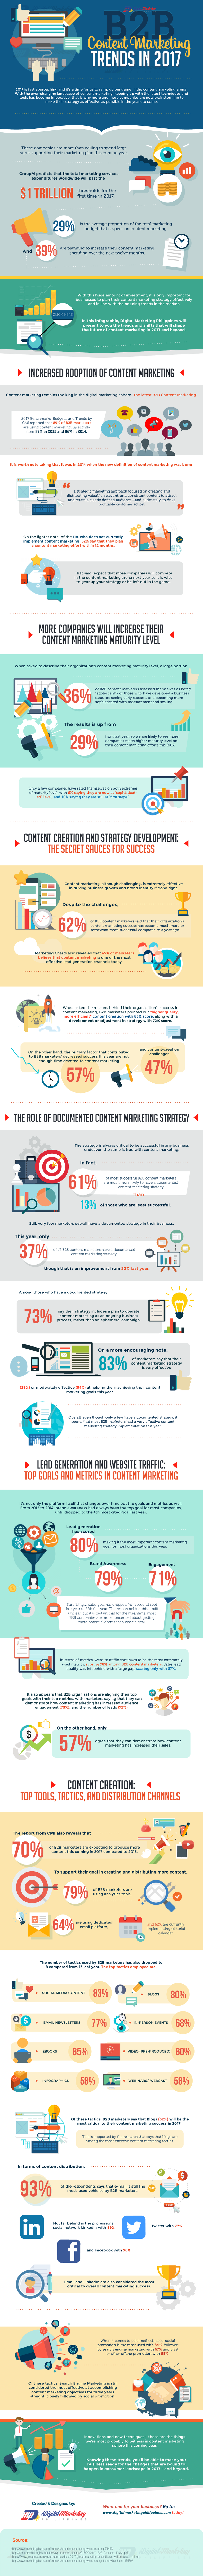 B2B-Content-Marketing-Trends-in-2017-HD-1.png